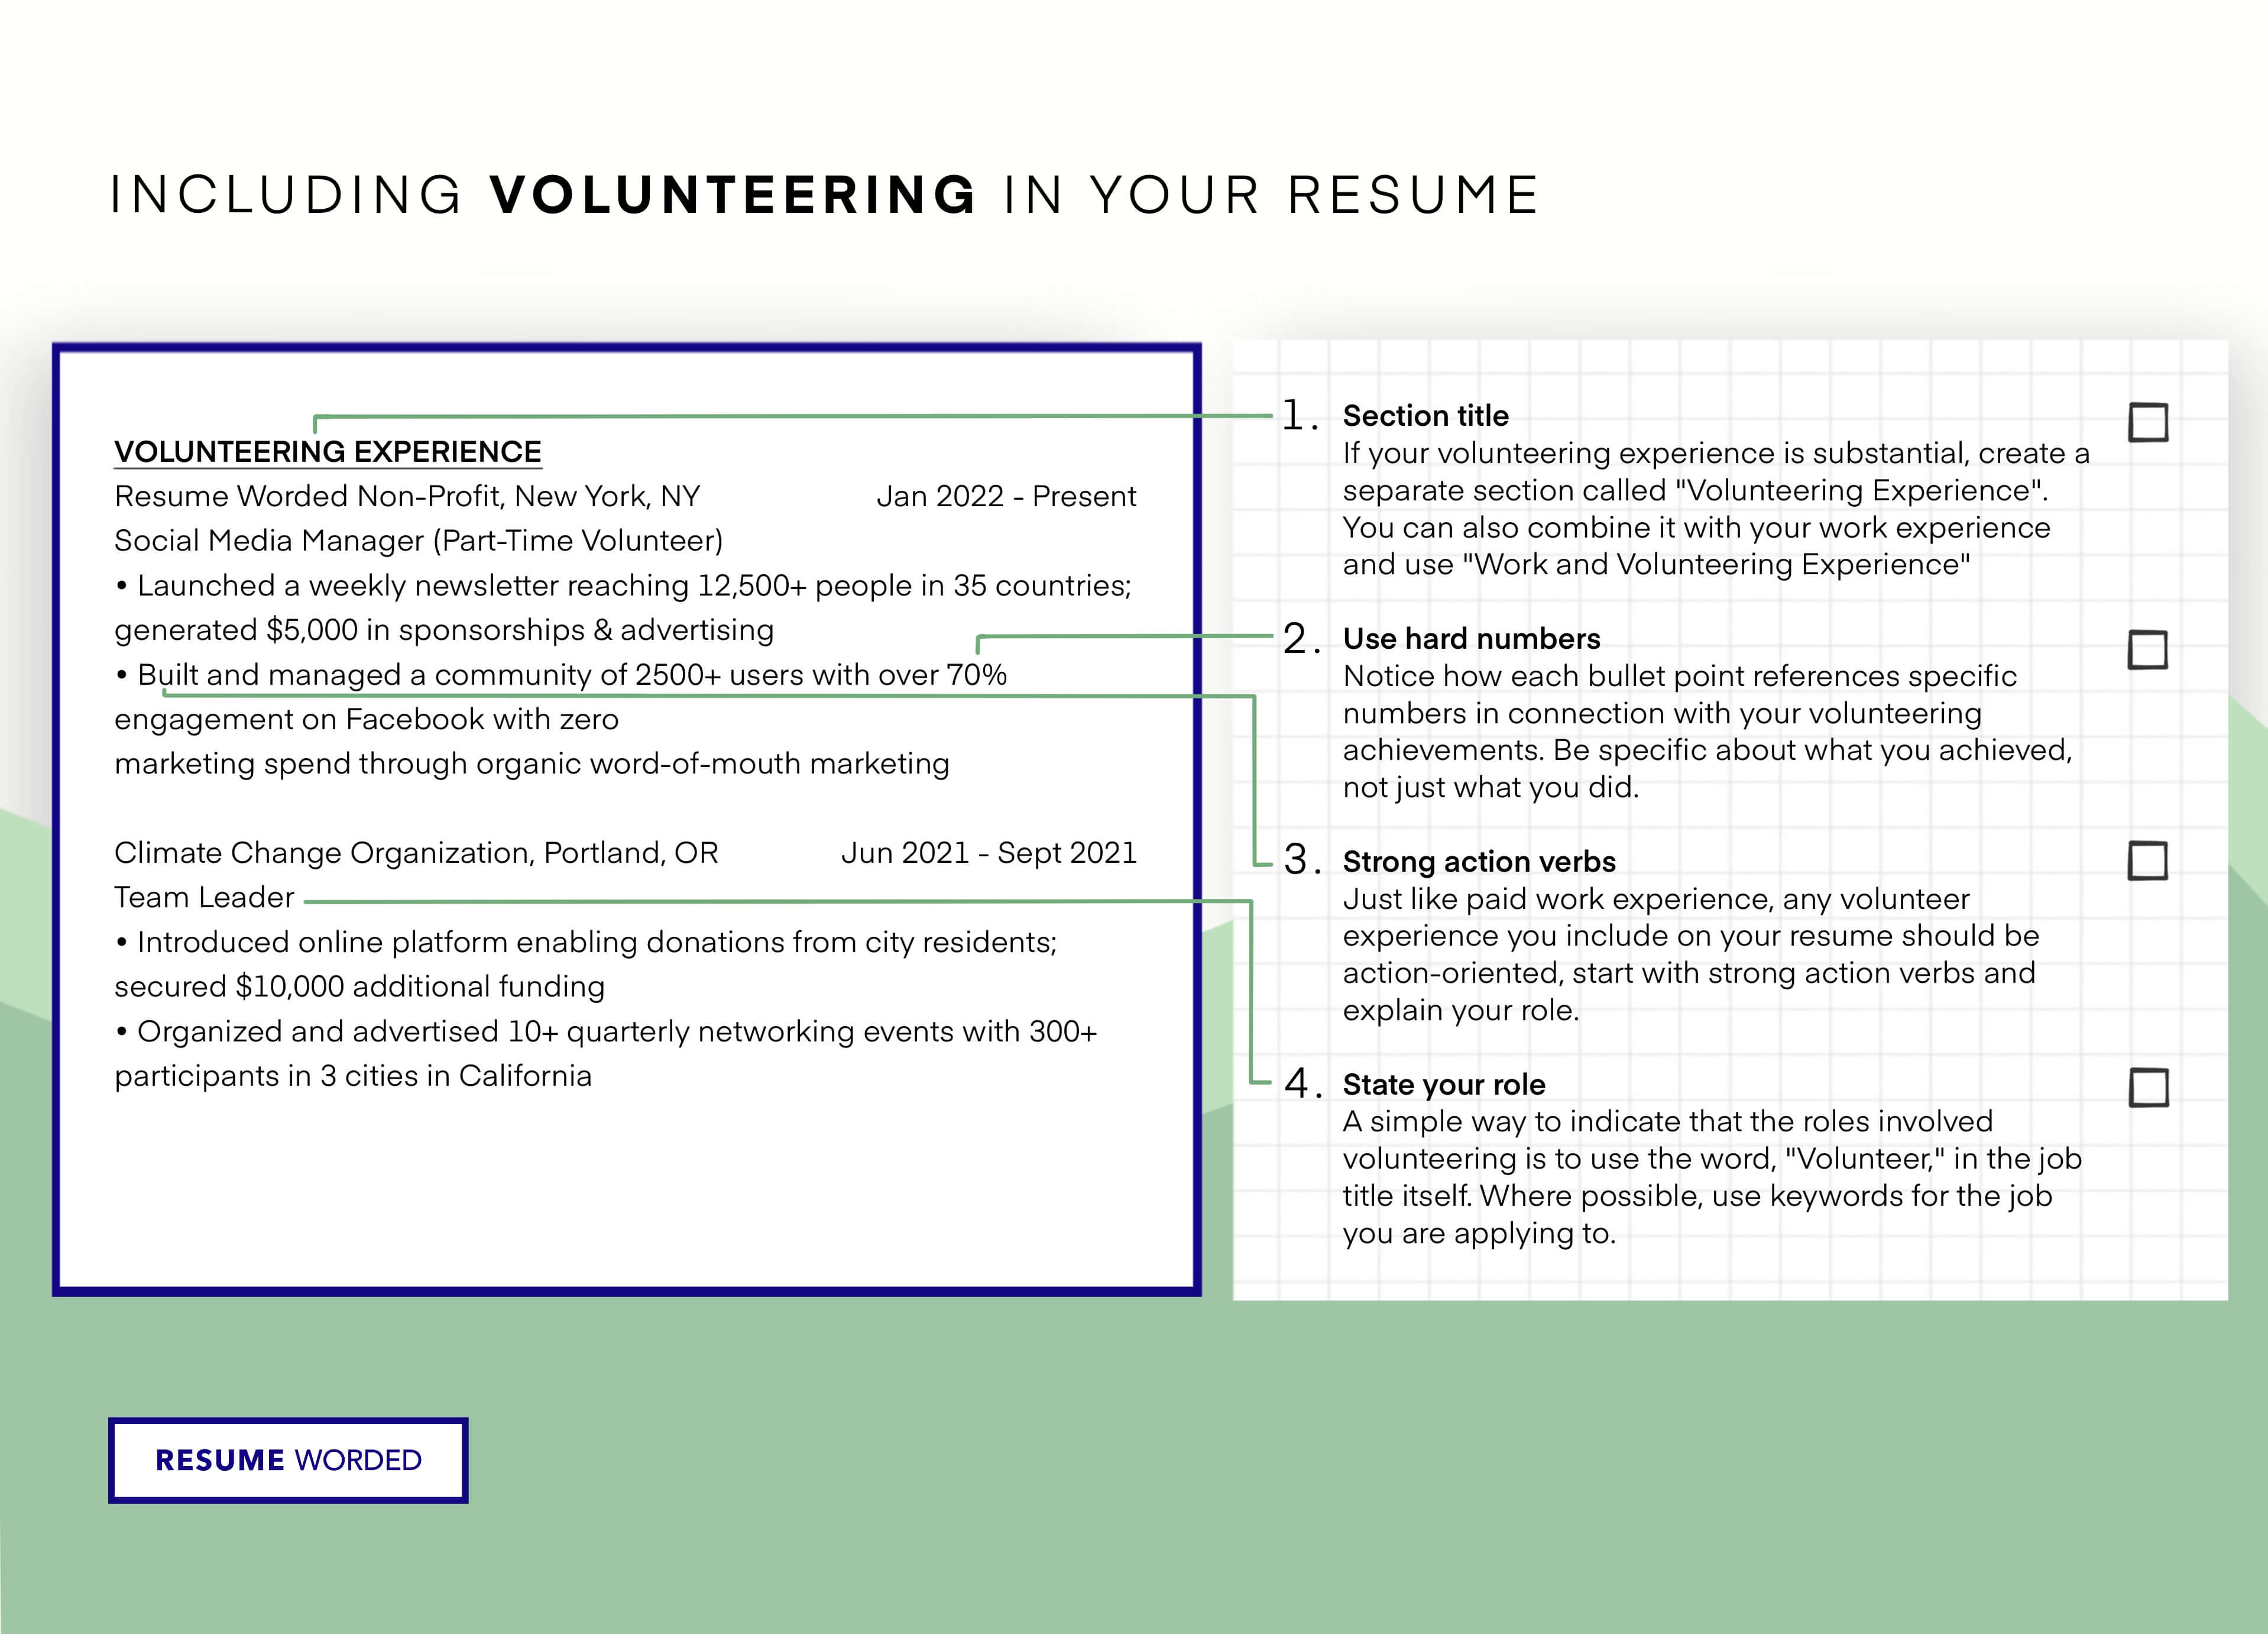 Relevant school and volunteer projects, related to transferrable skills in HR - Entry Level Human Resources (HR) Resume